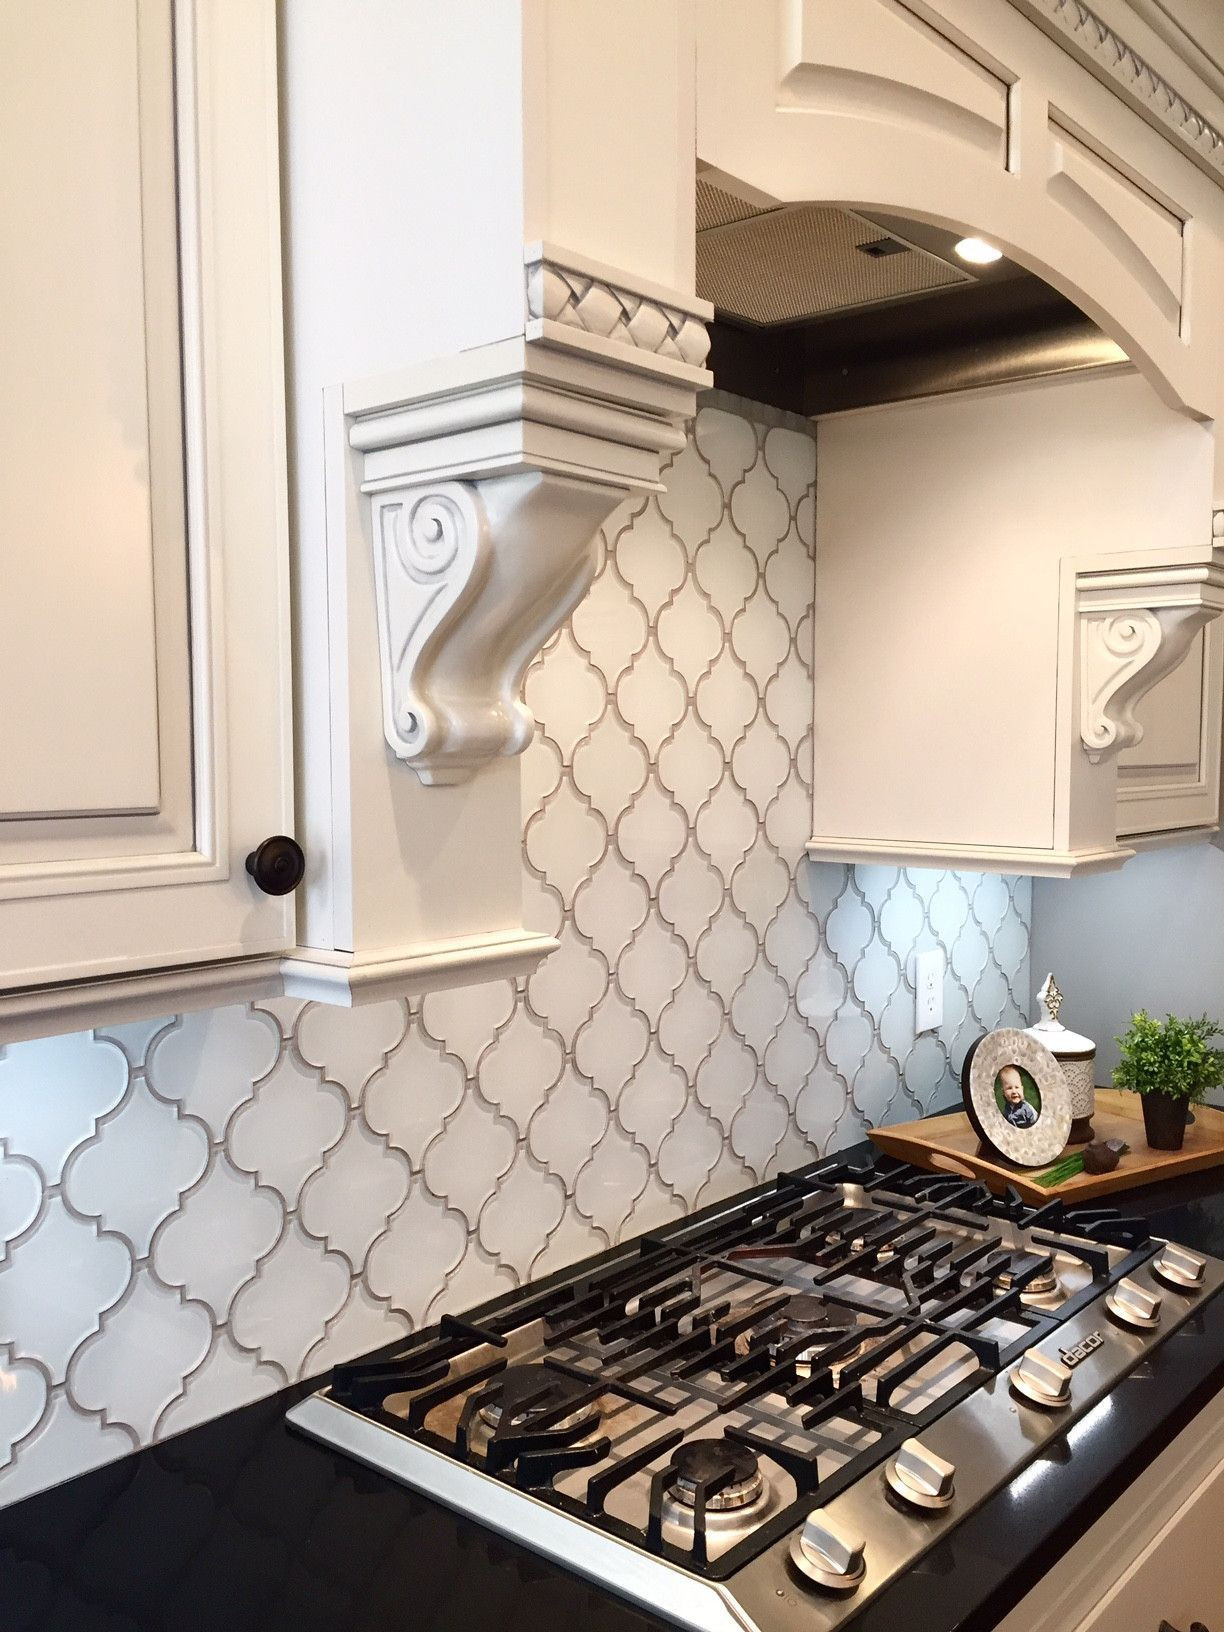 Kitchen Mosaic Tile
 Bring a touch of elegance to your new new kitchen